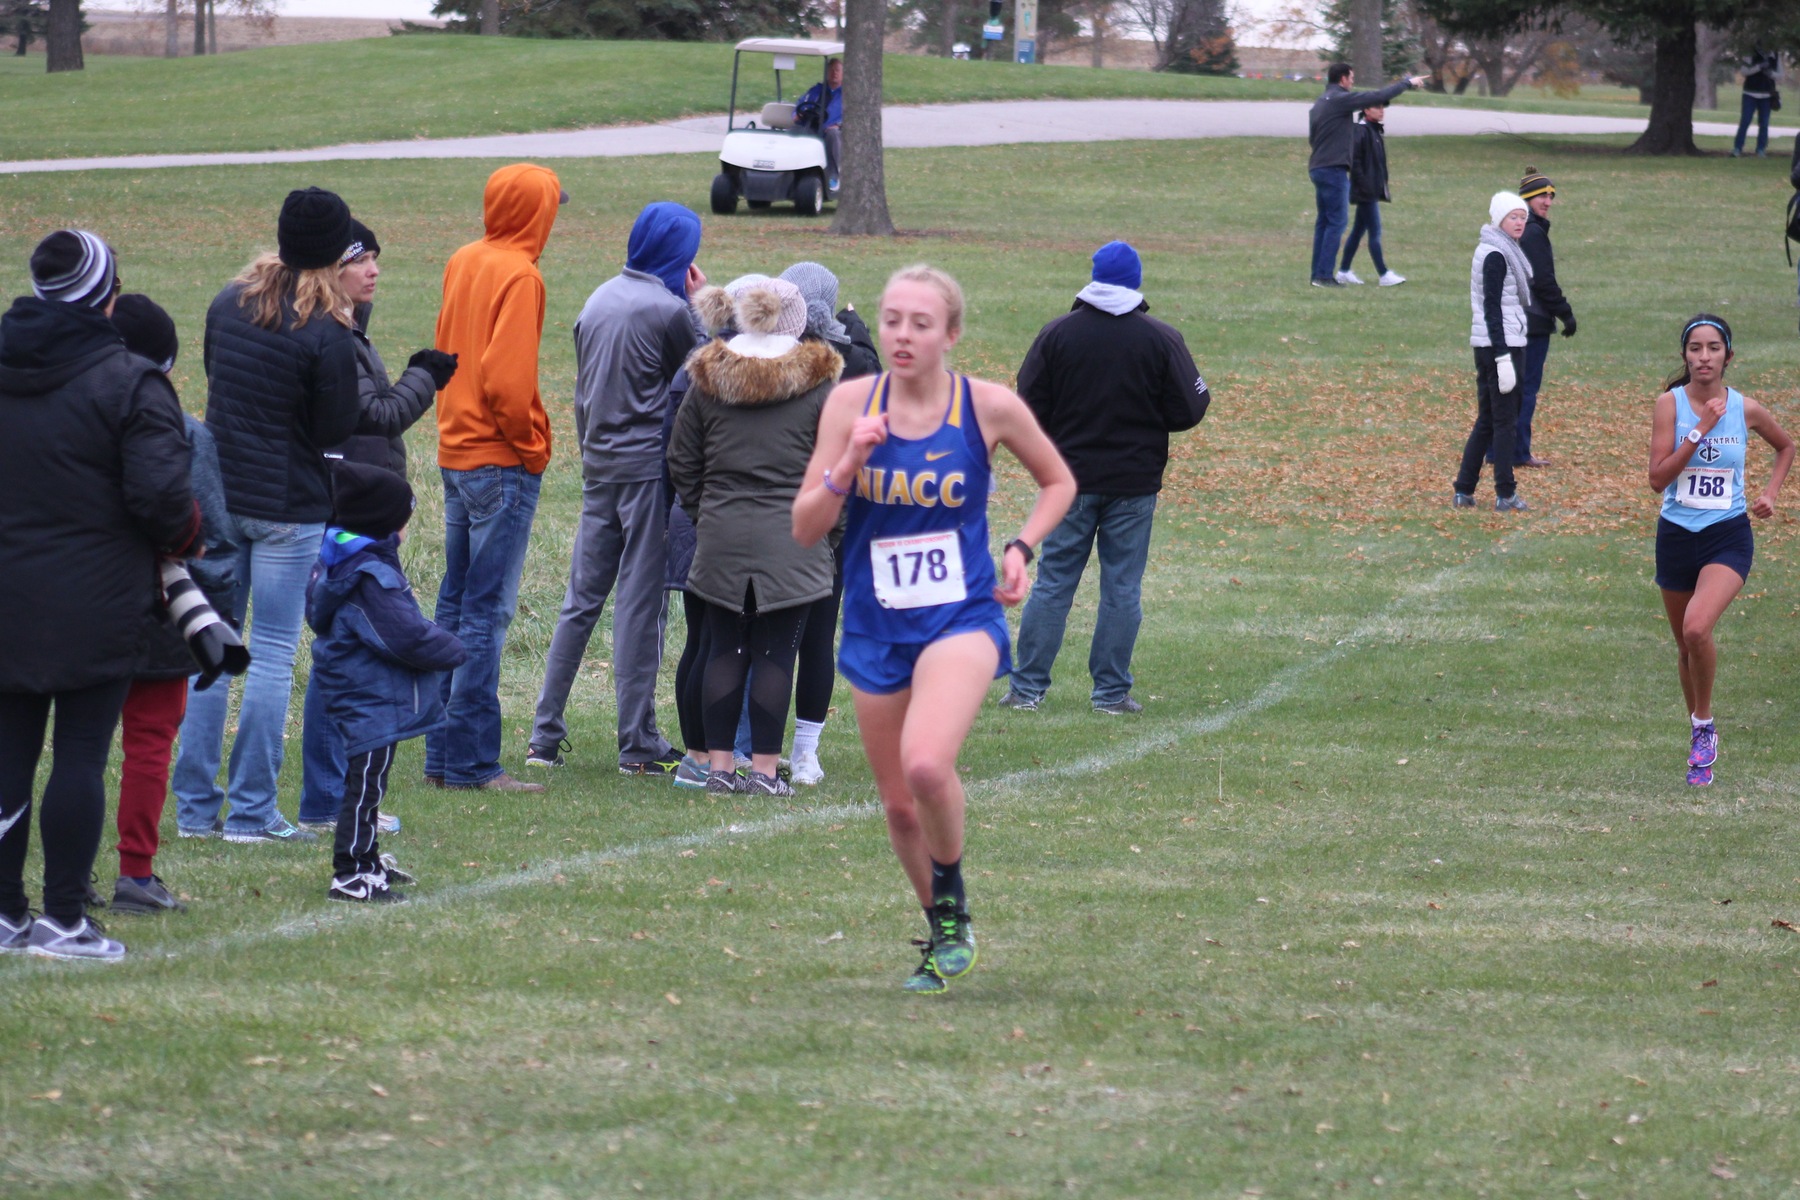 NIACC's Julia Dunlavey runs to 14th-place finish at regional meet Sunday in Fort Dodge.